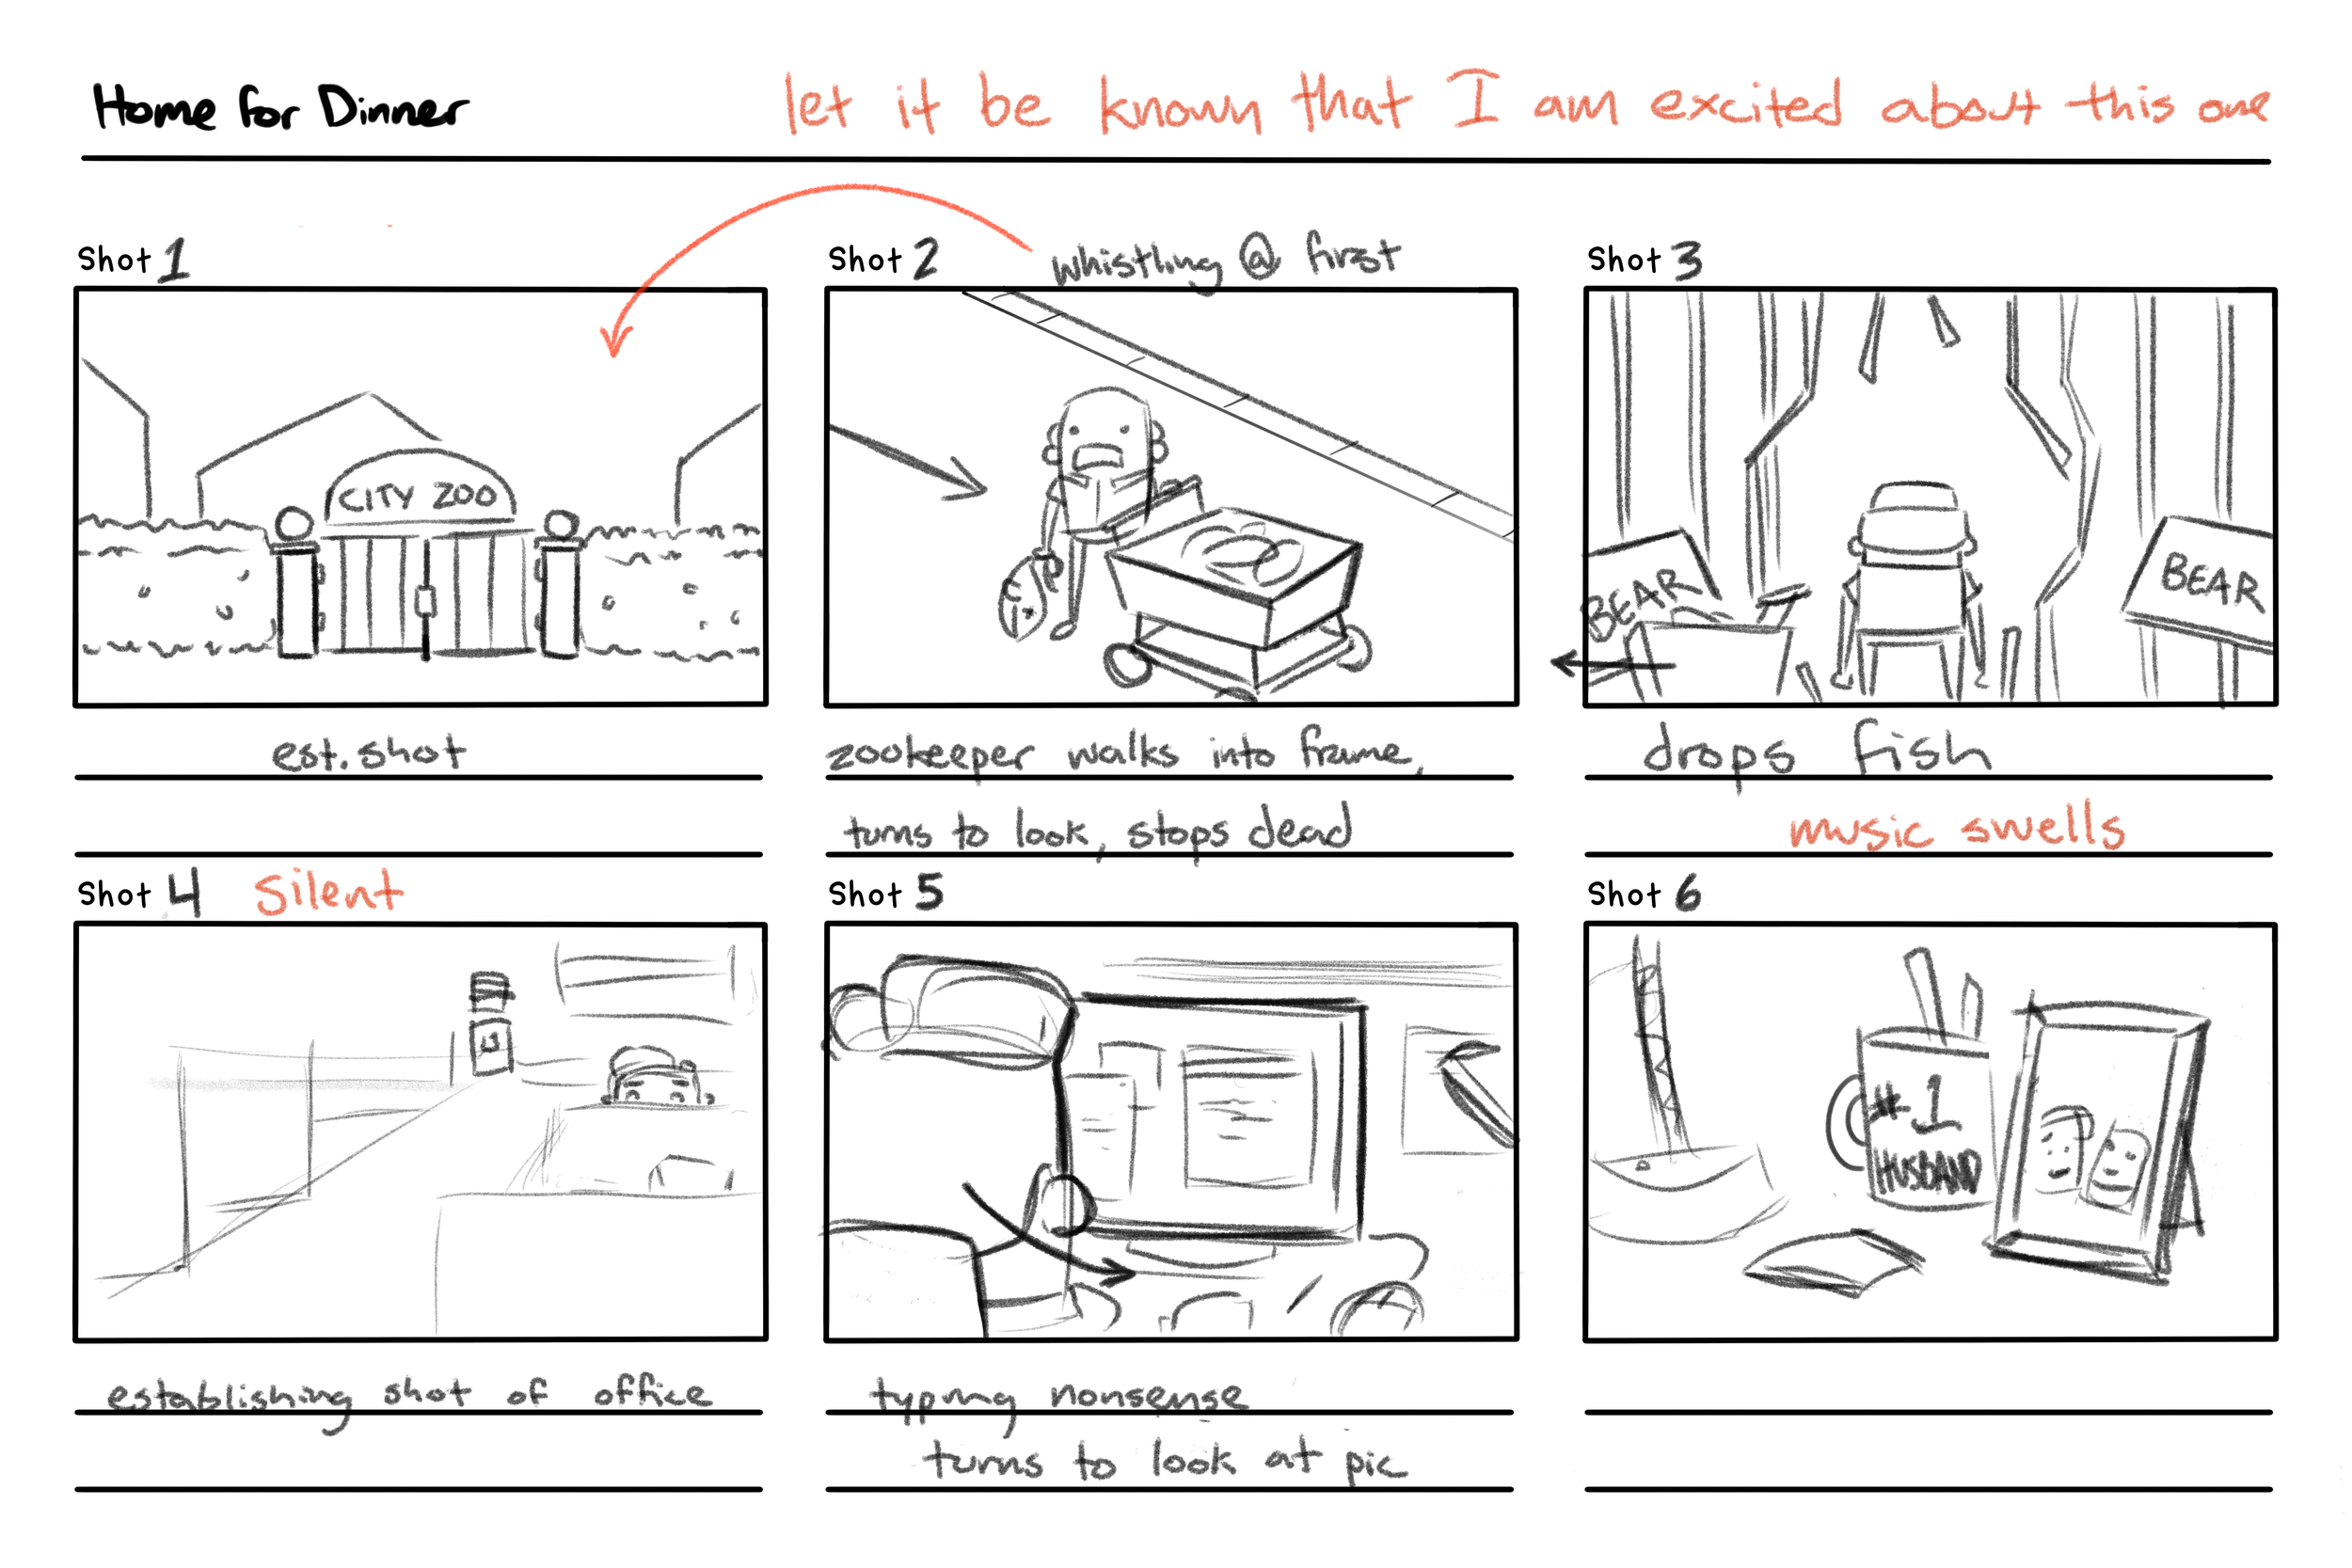 Home_For_Dinner_Storyboard-1.png